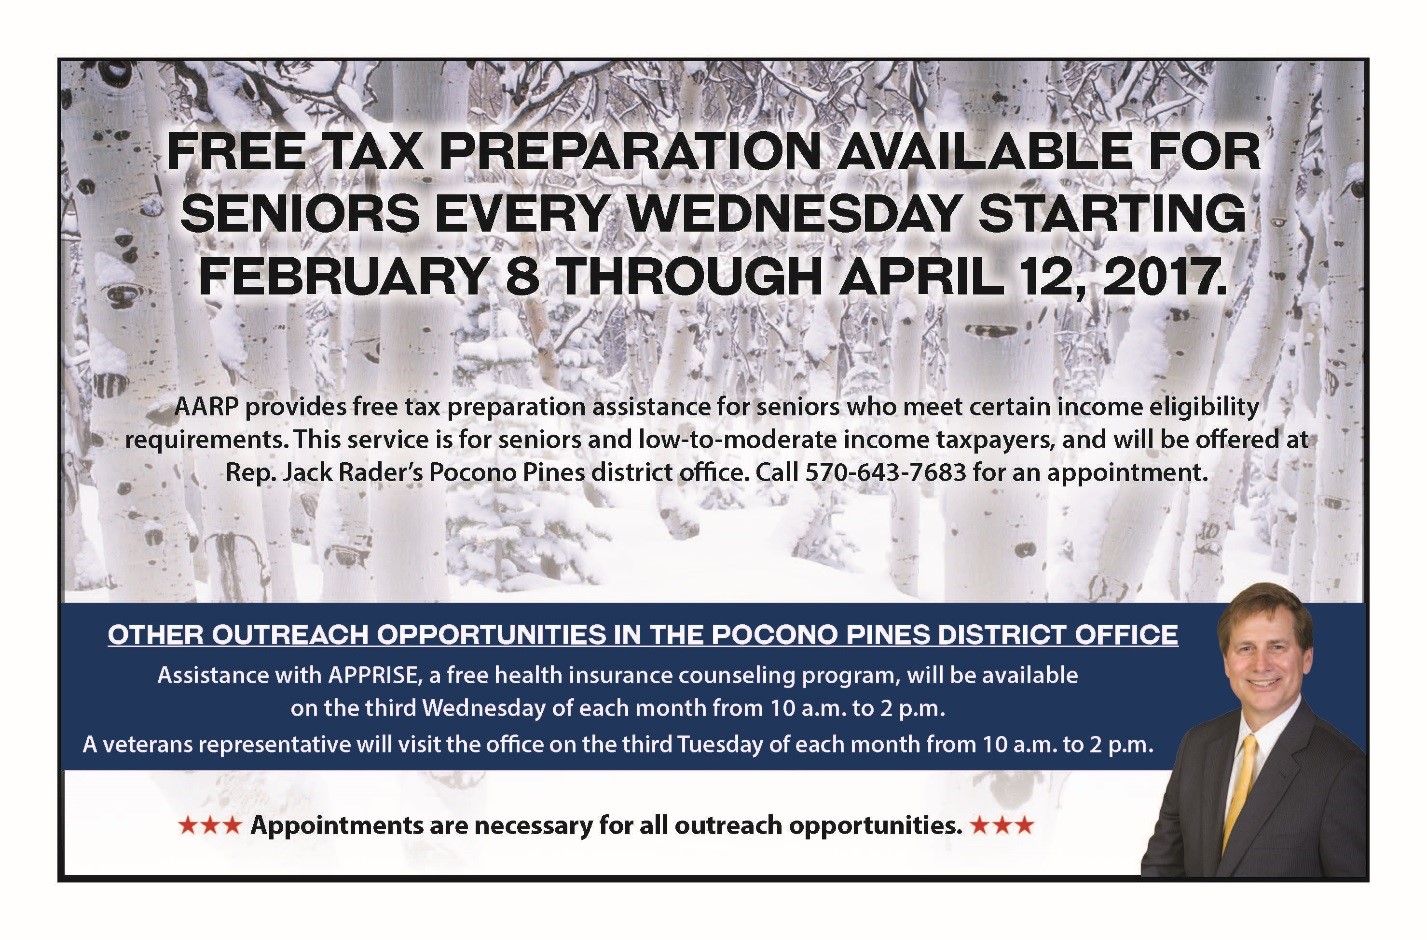 Free Tax Preparation Available for Seniors Beginning Feb. 8 | PA State Rep. Jack Rader1427 x 940